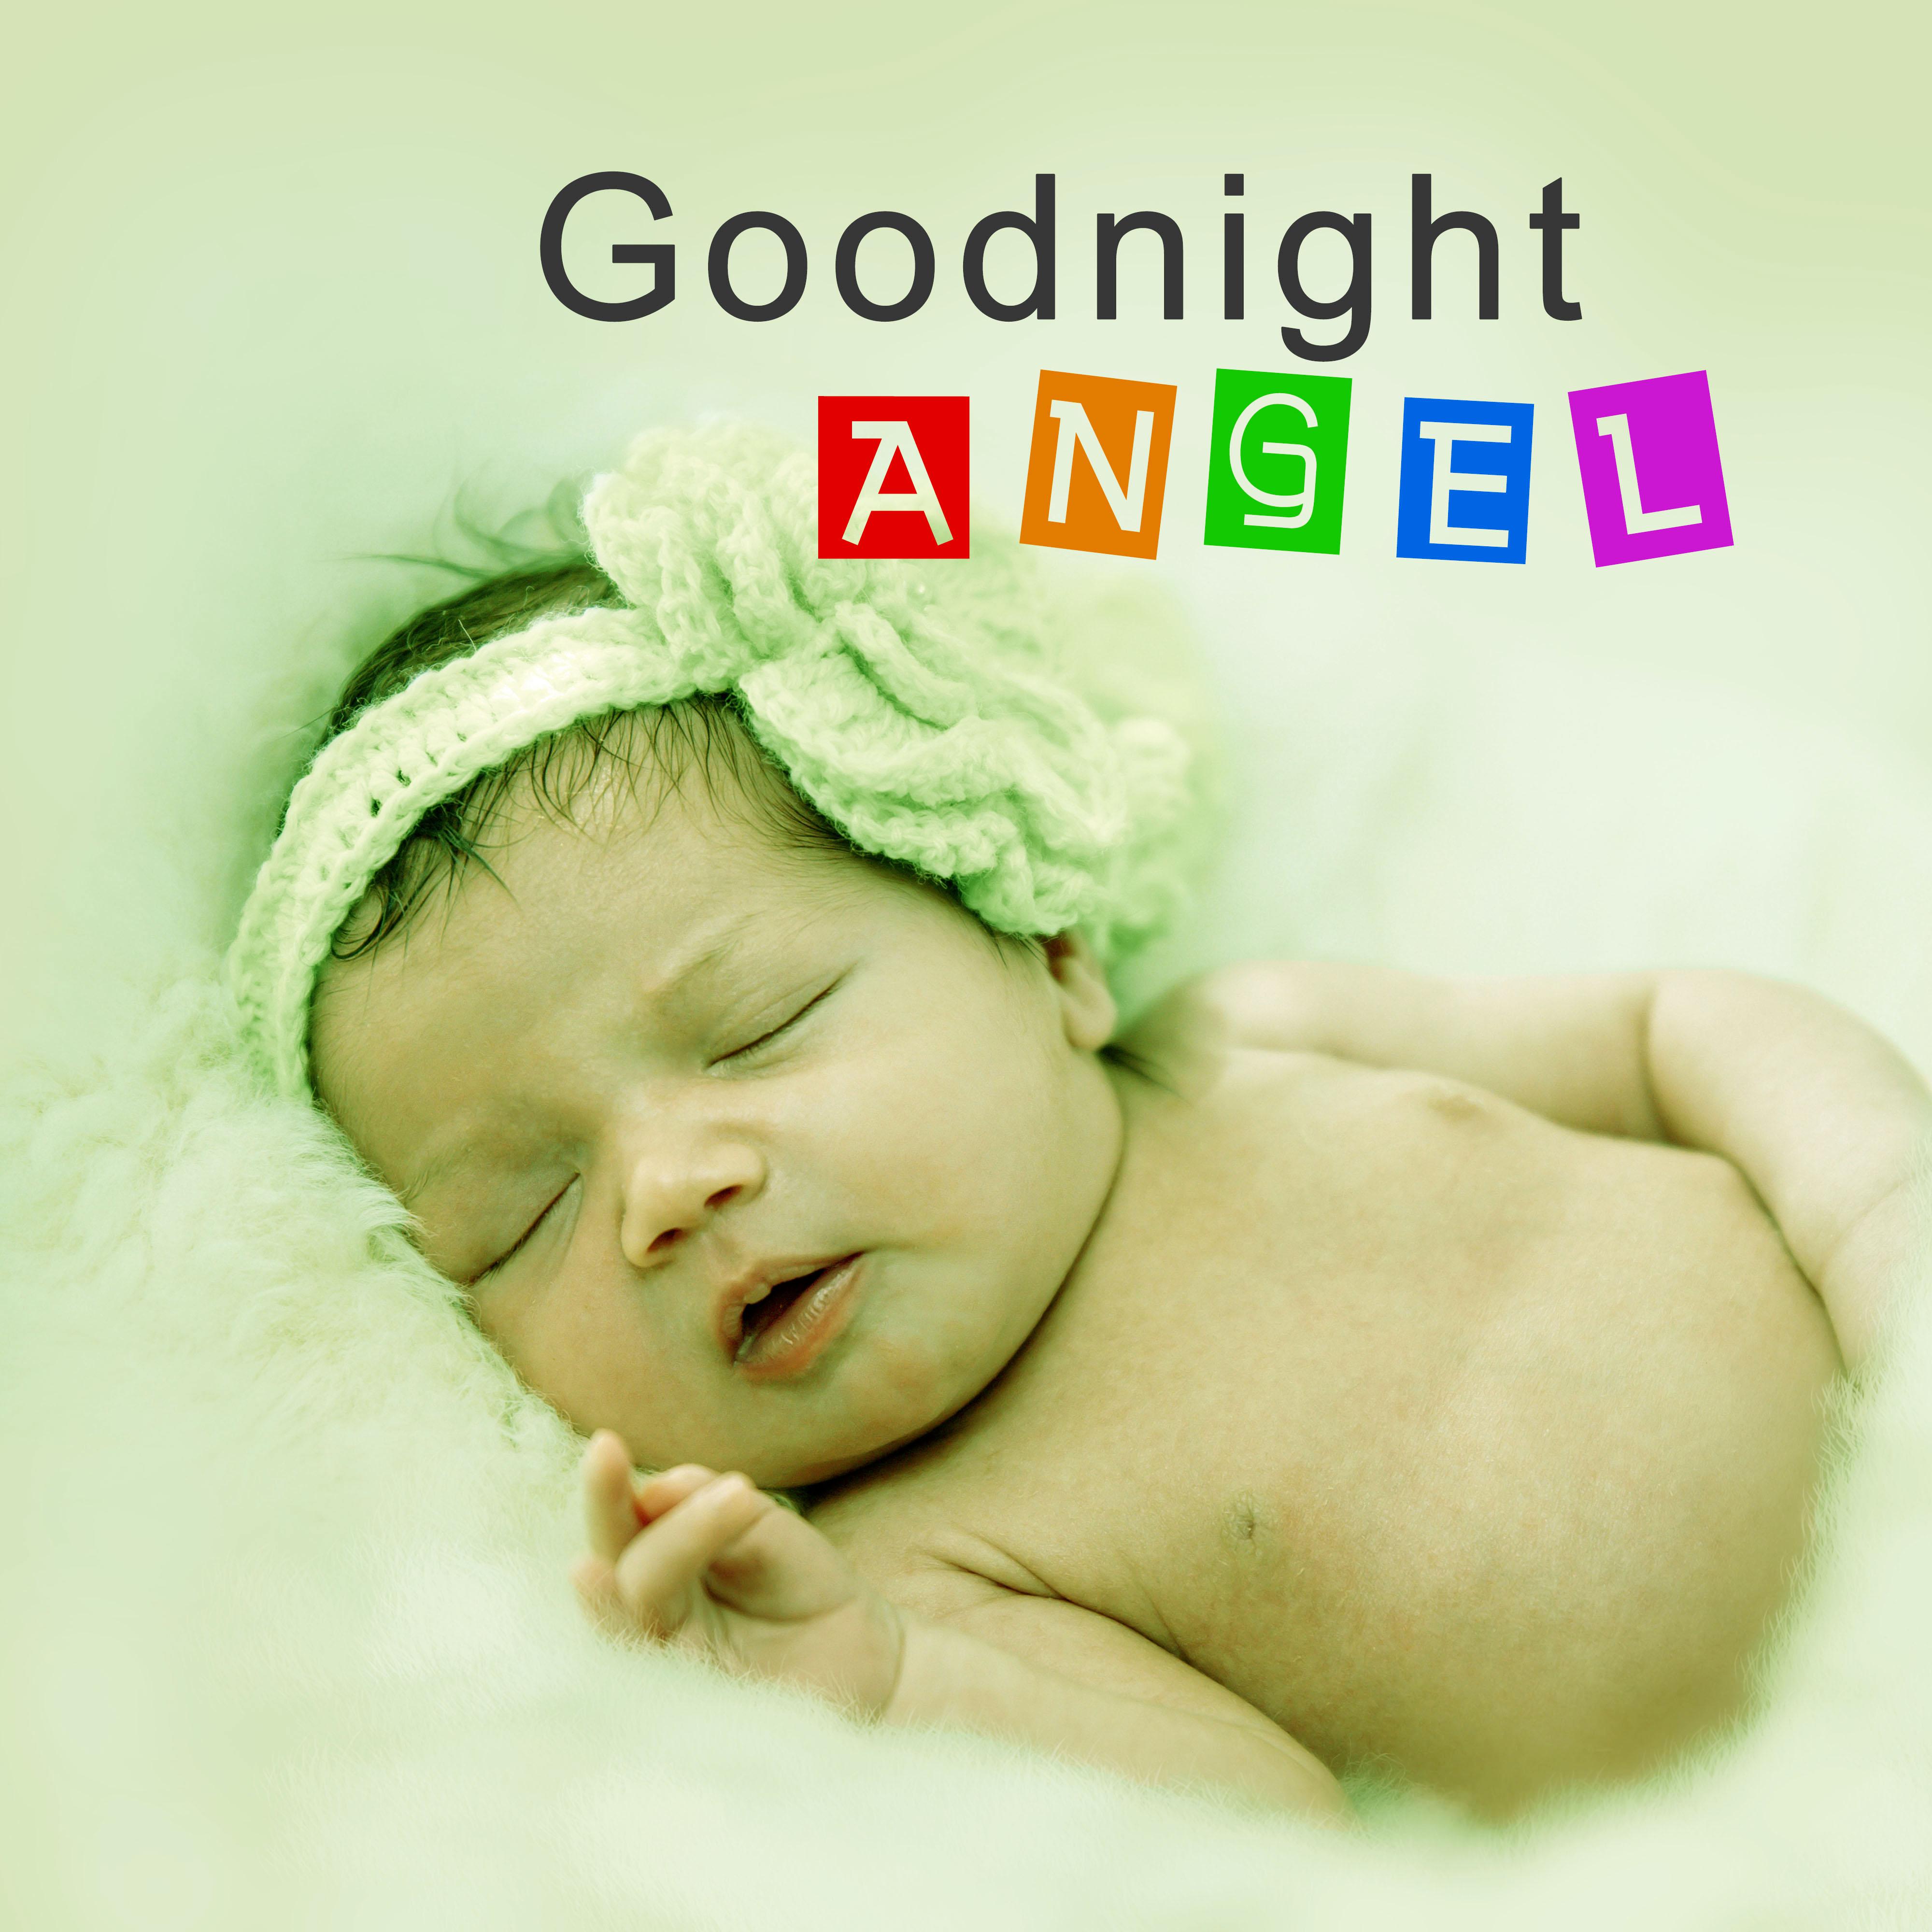 Goodnight Angel – Soothing, Classical Lullabies, Bedtime Baby, Music to Sleep, Calm Music for Baby, Mozart, Bach, Beethoven